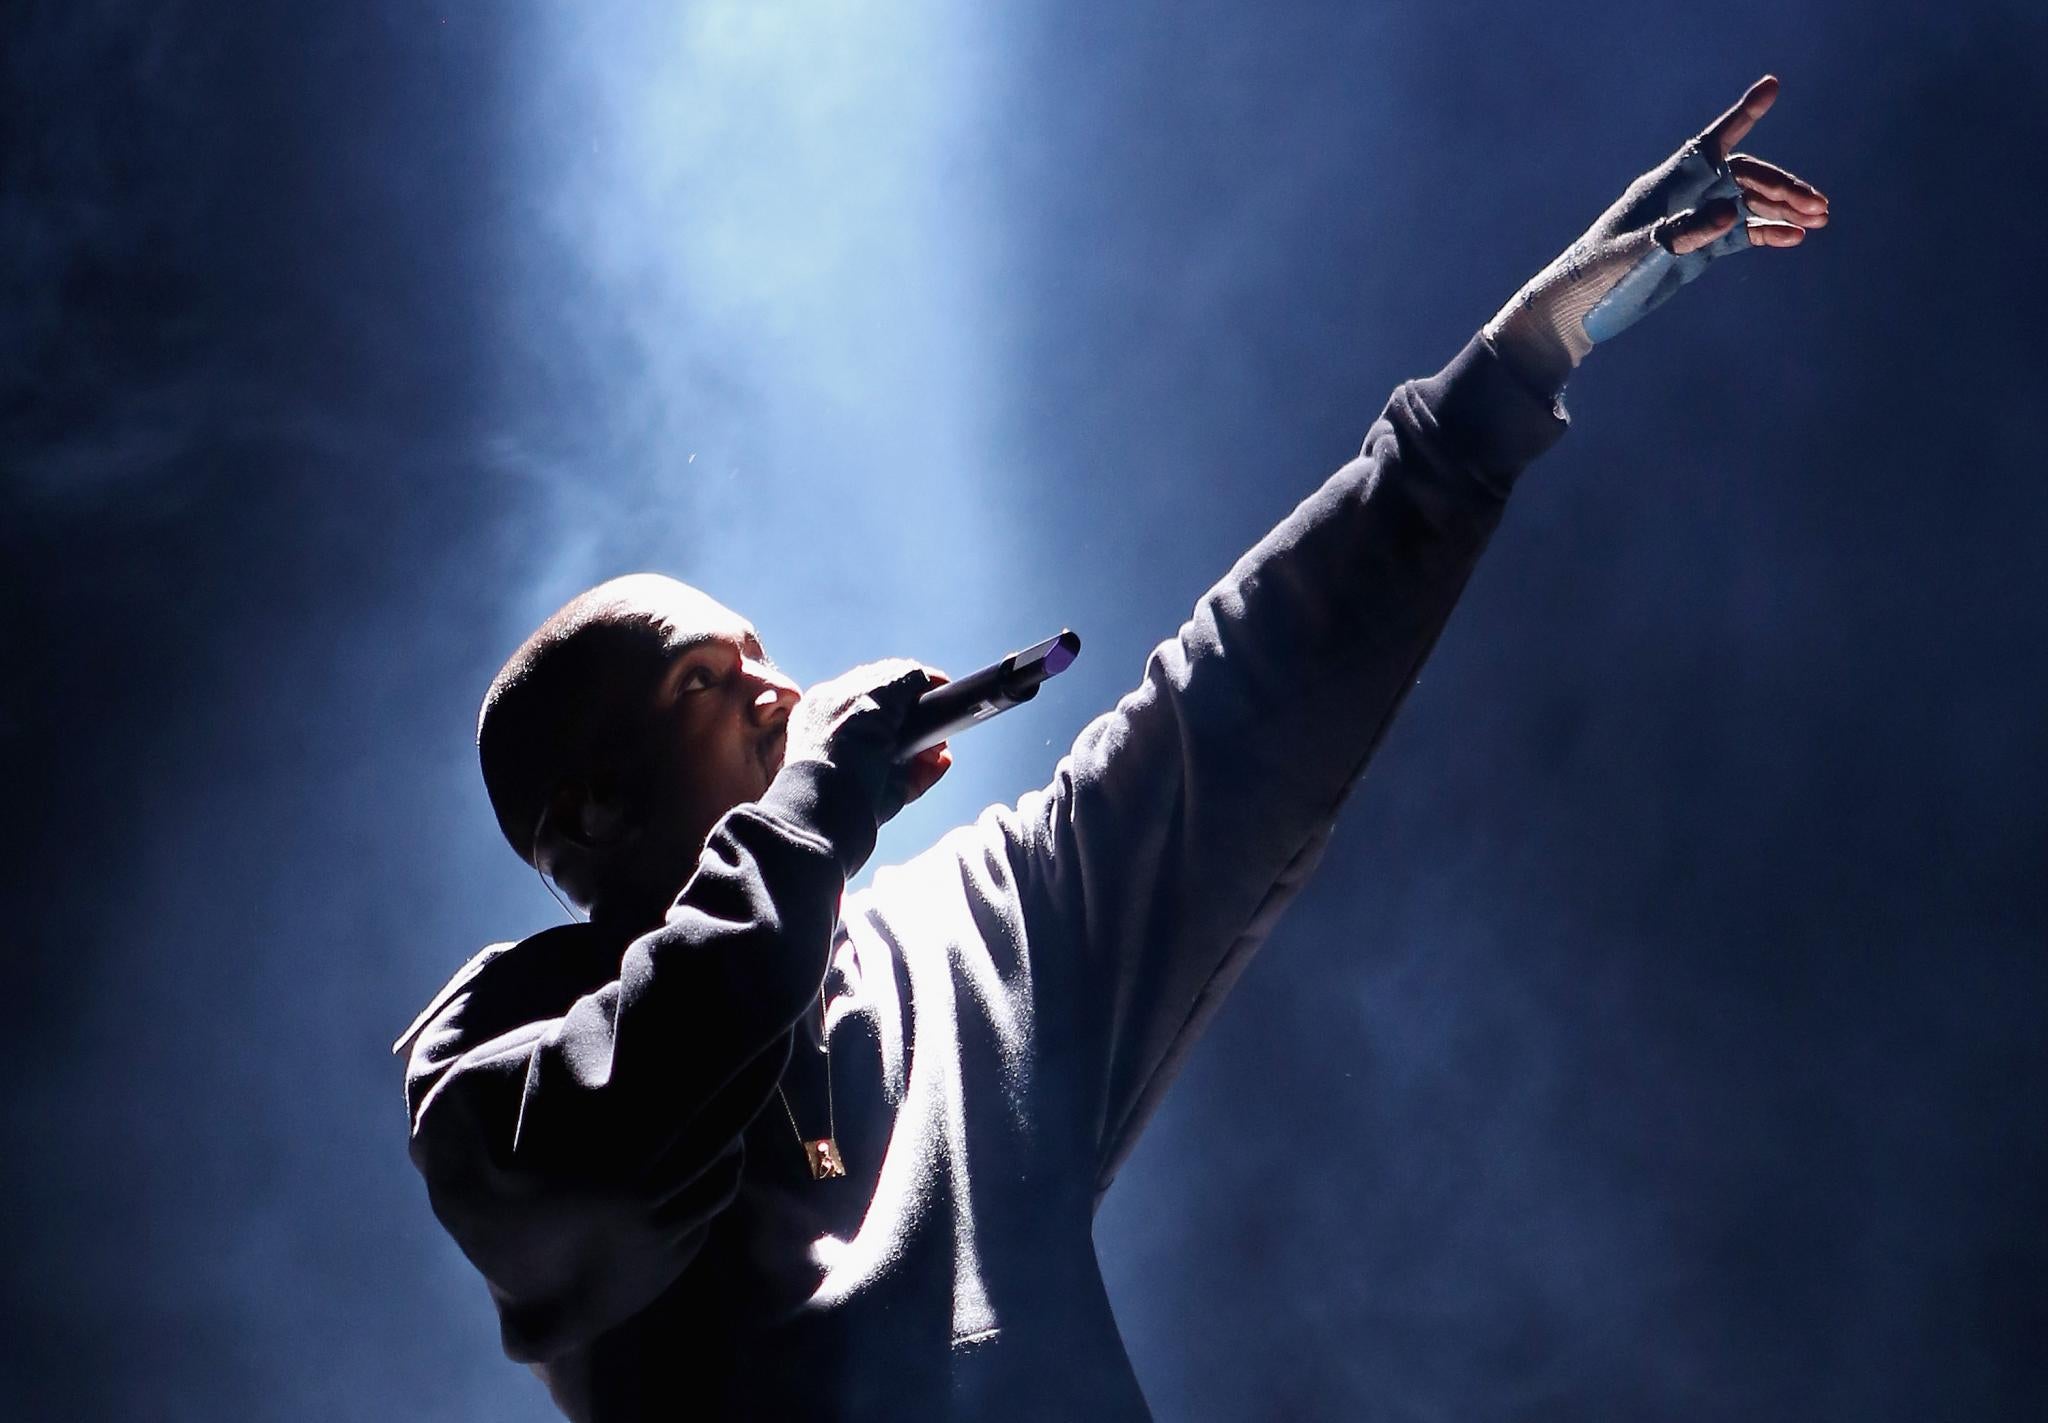 5 Kanye West Songs You Should Listen to When You Need Inspiration
